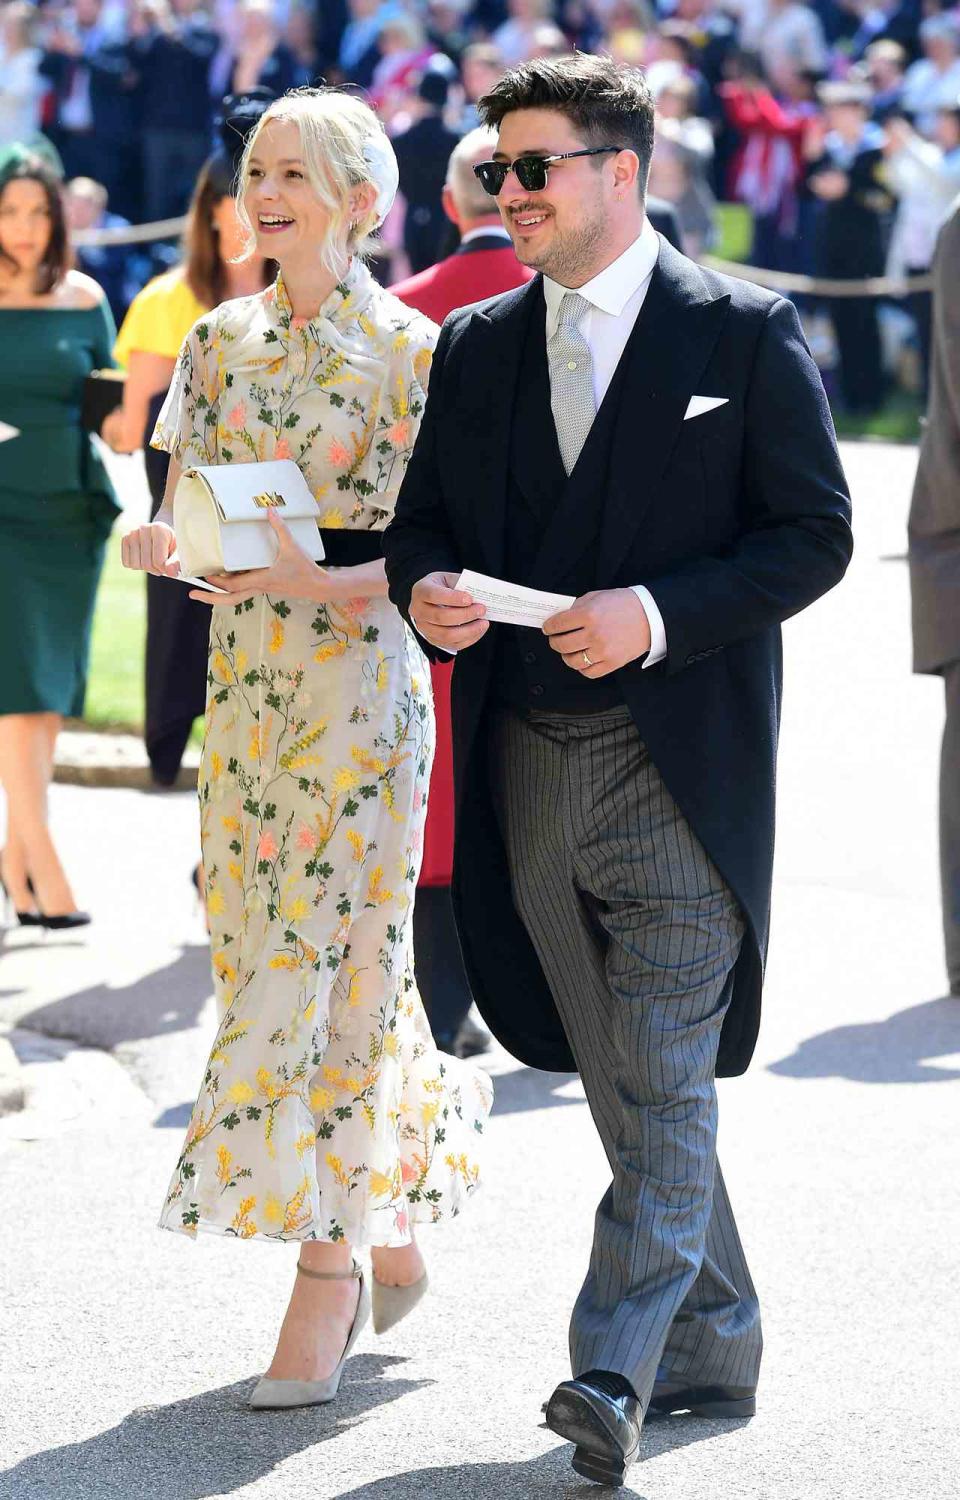 Marcus Mumford and Carey Mulligan arrive at St George's Chapel at Windsor Castle before the wedding of Prince Harry to Meghan Markle on May 19, 2018 in Windsor, England